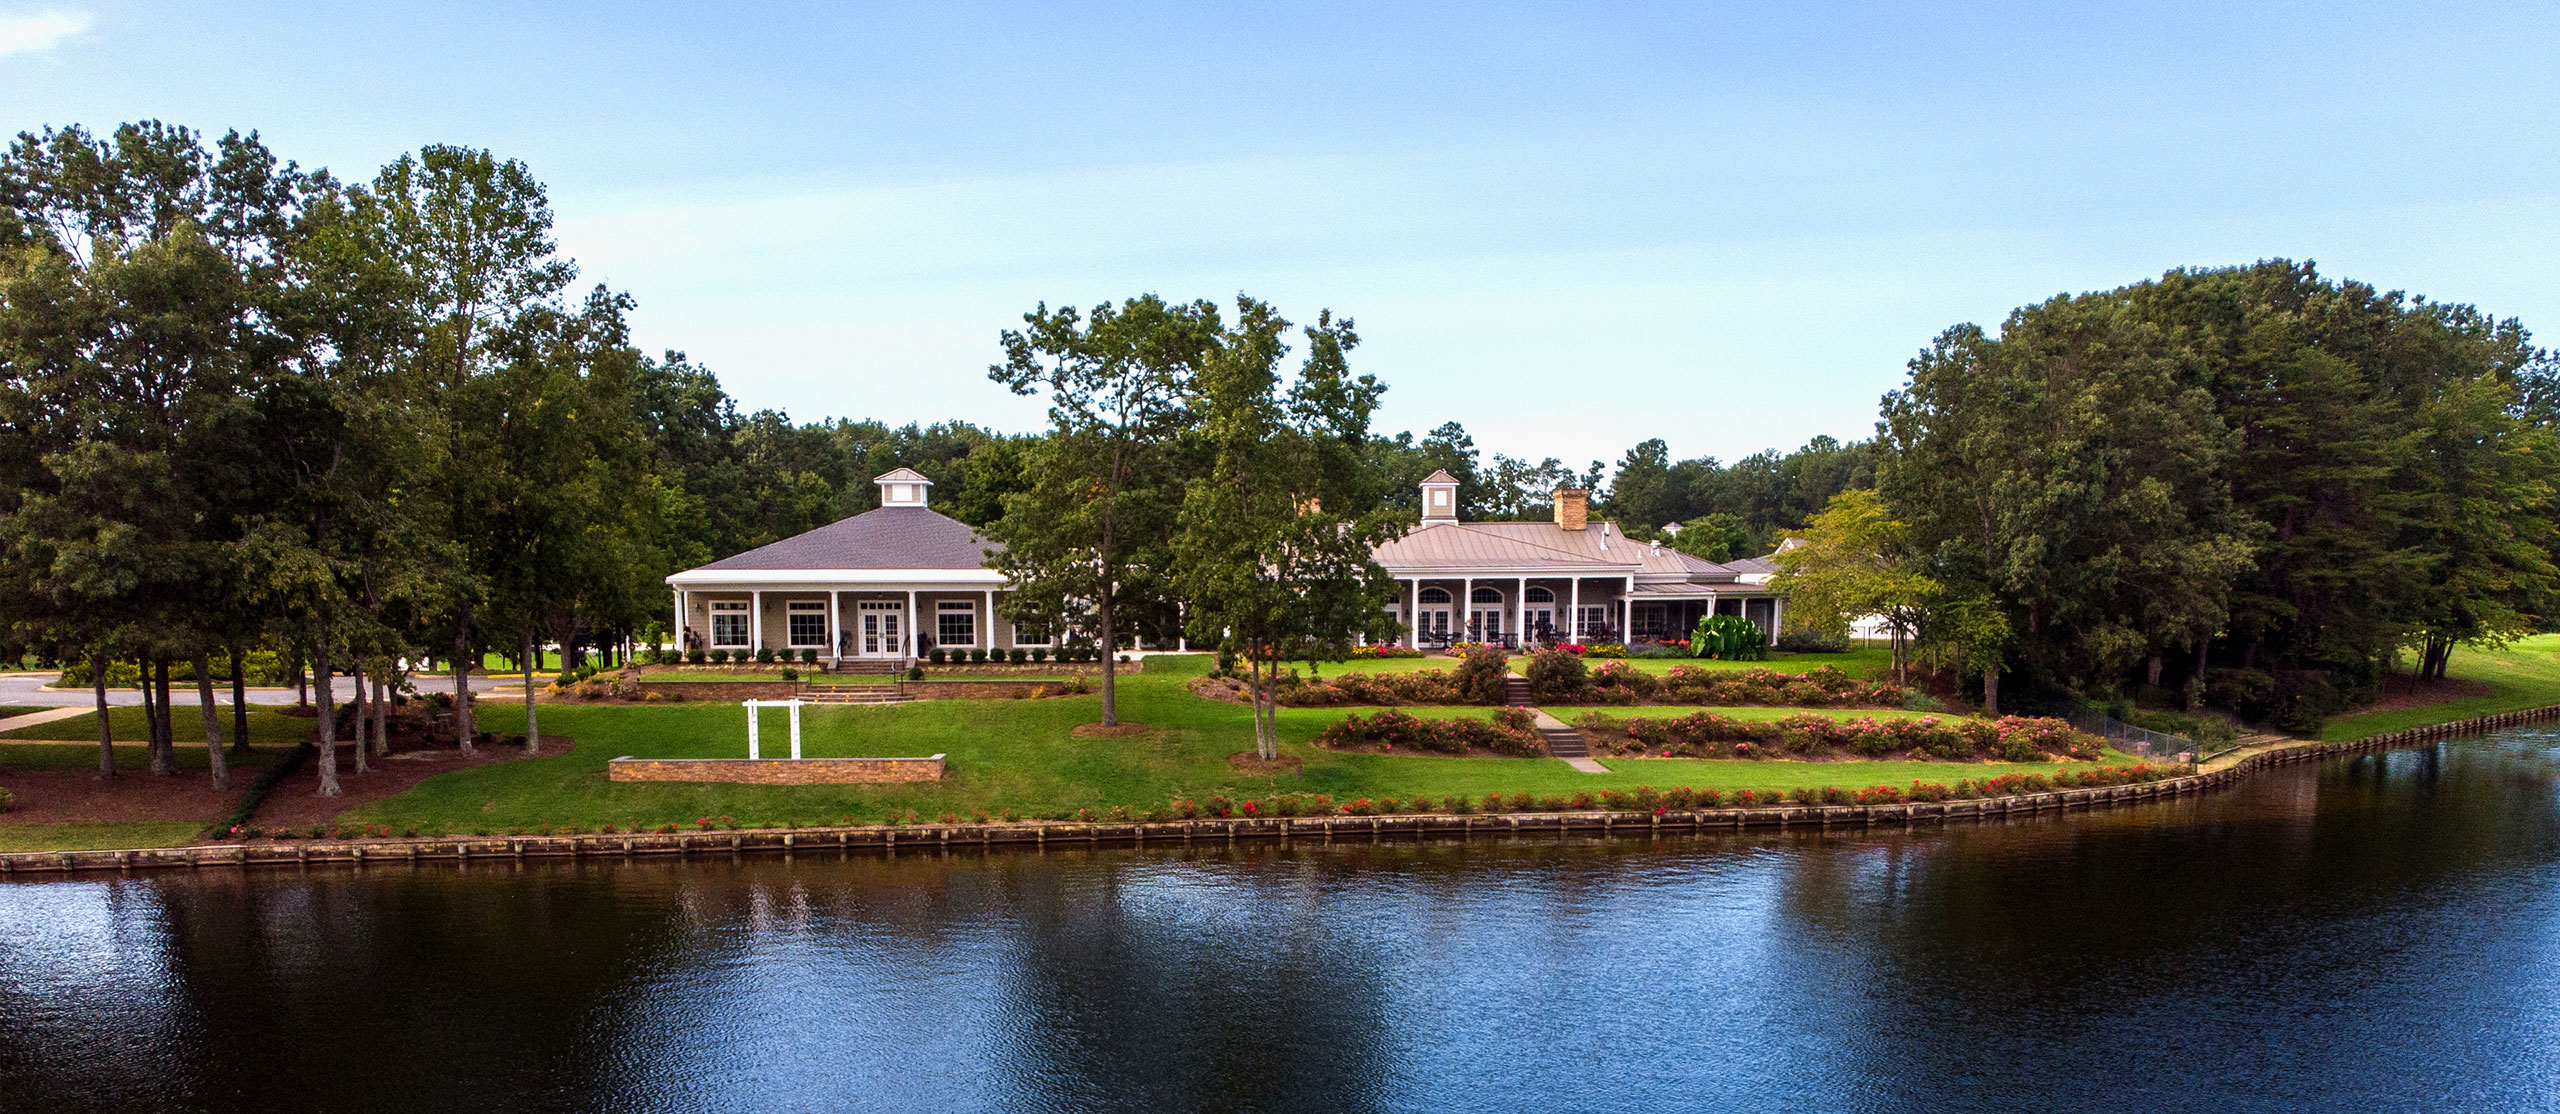 Premier Event Venue - The Cove At Fawn Lake Country Club